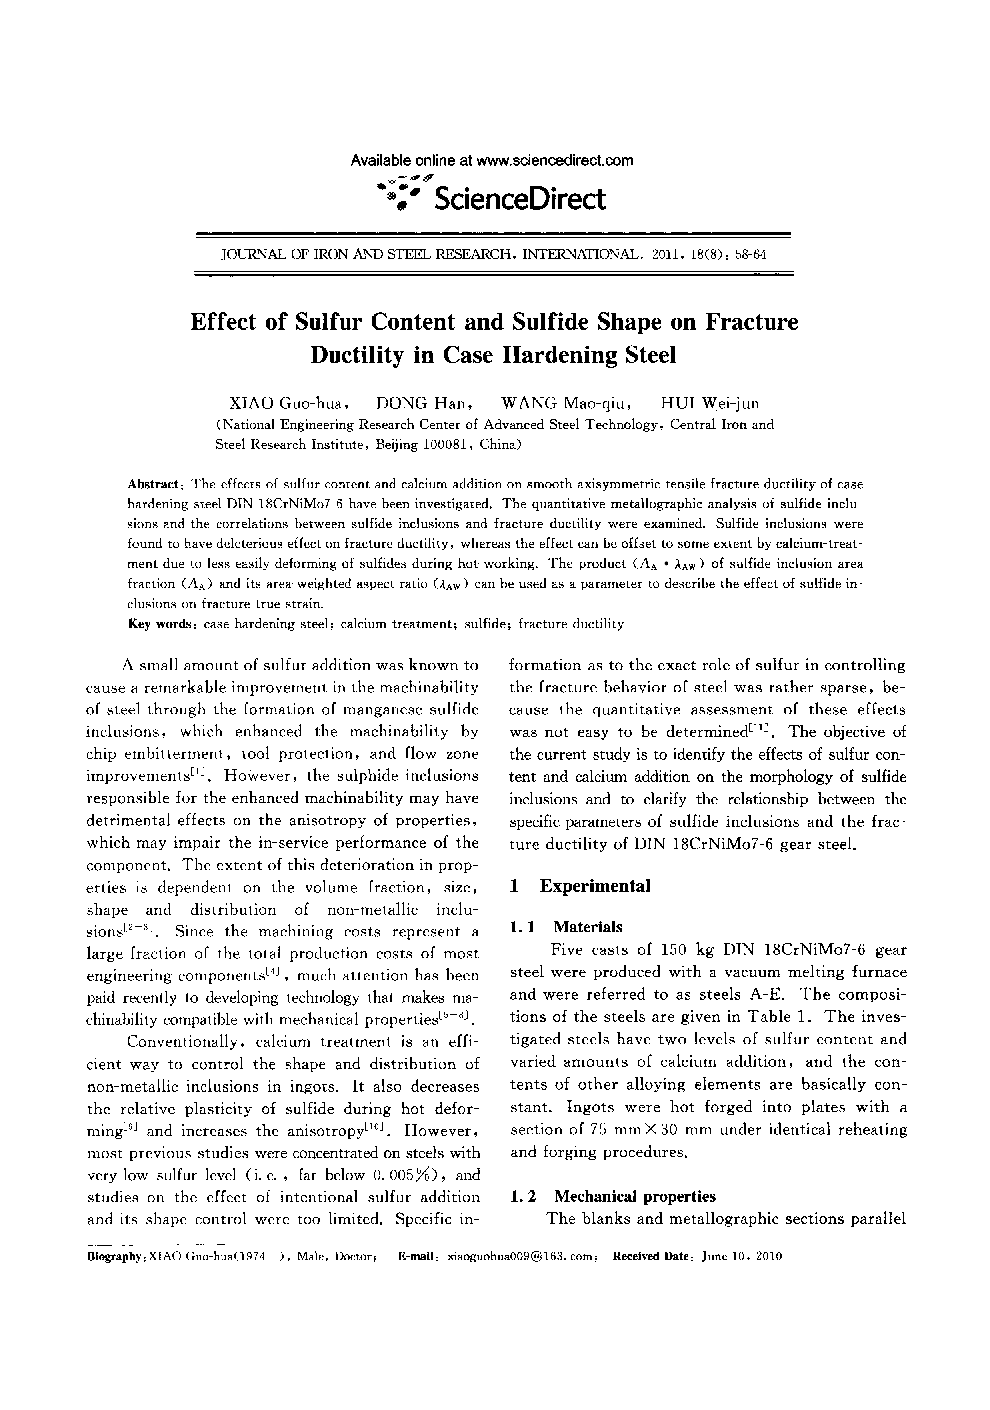 Effect of Sulfur Content and Sulfide Shape on Fracture Ductility in Case Hardening Steel